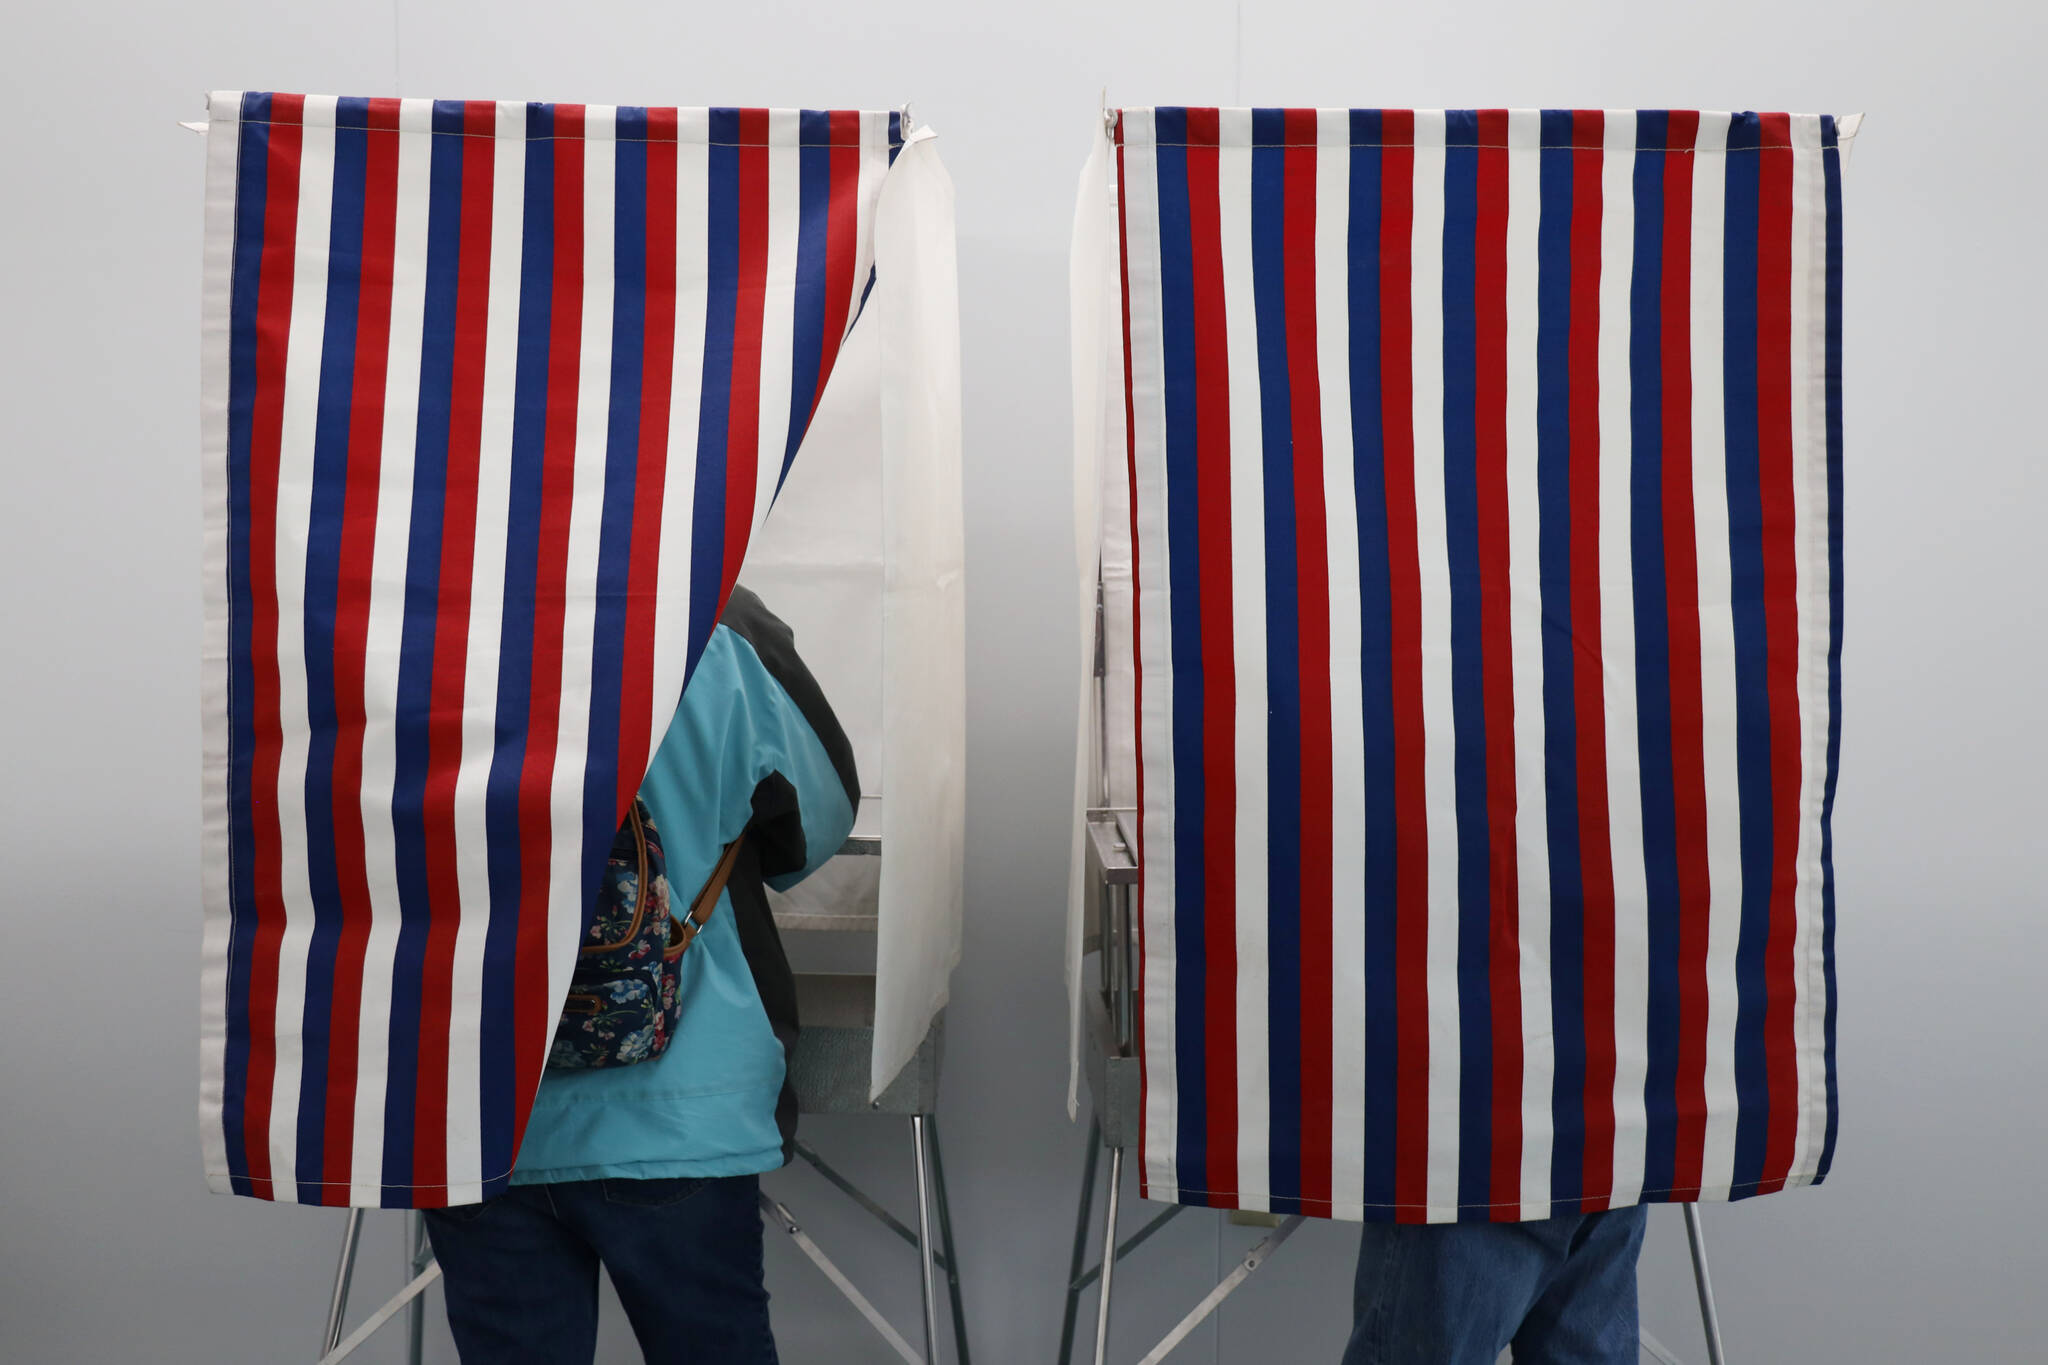 Two residents stand in voter booths on the first day of early and absentee in-person voting across the state for the Nov. 8 general election. Recent filings for candidates in statewide races shows spending ramping up as the big day approaches. (Clarise Larson / Juneau Empire File)